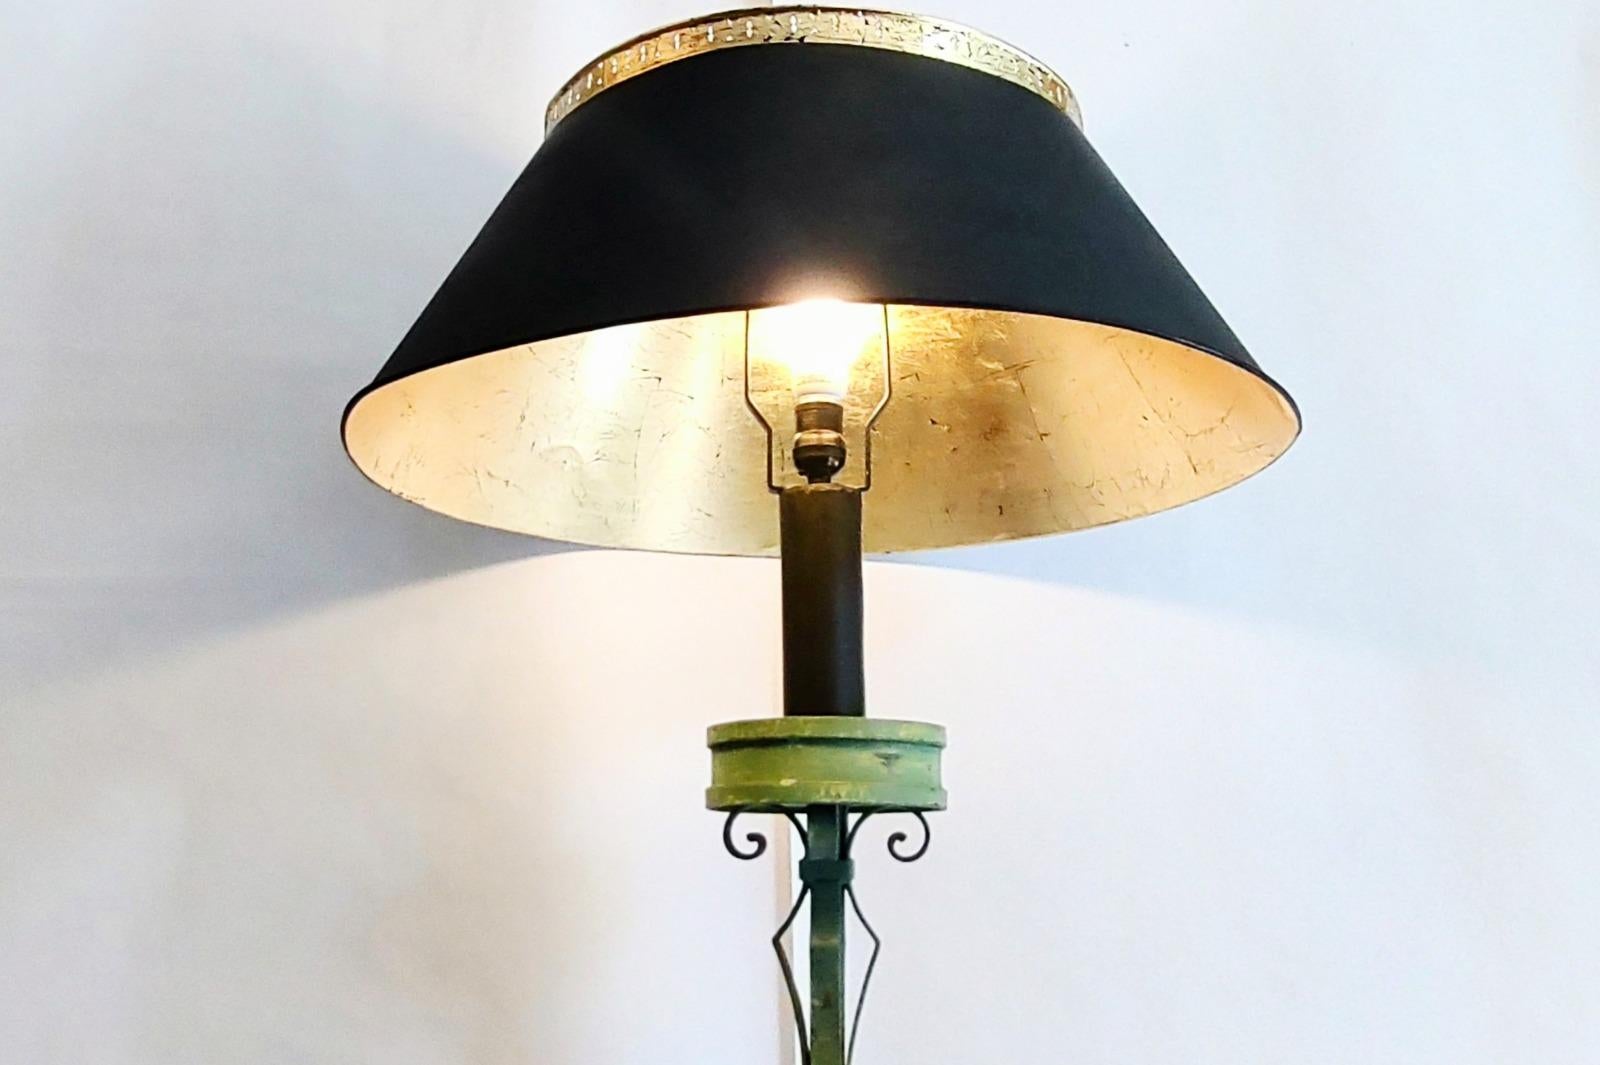 Metal Original and Elegant Wrought Iron Lamp from the 1950s. in Green, Black and Gold. For Sale